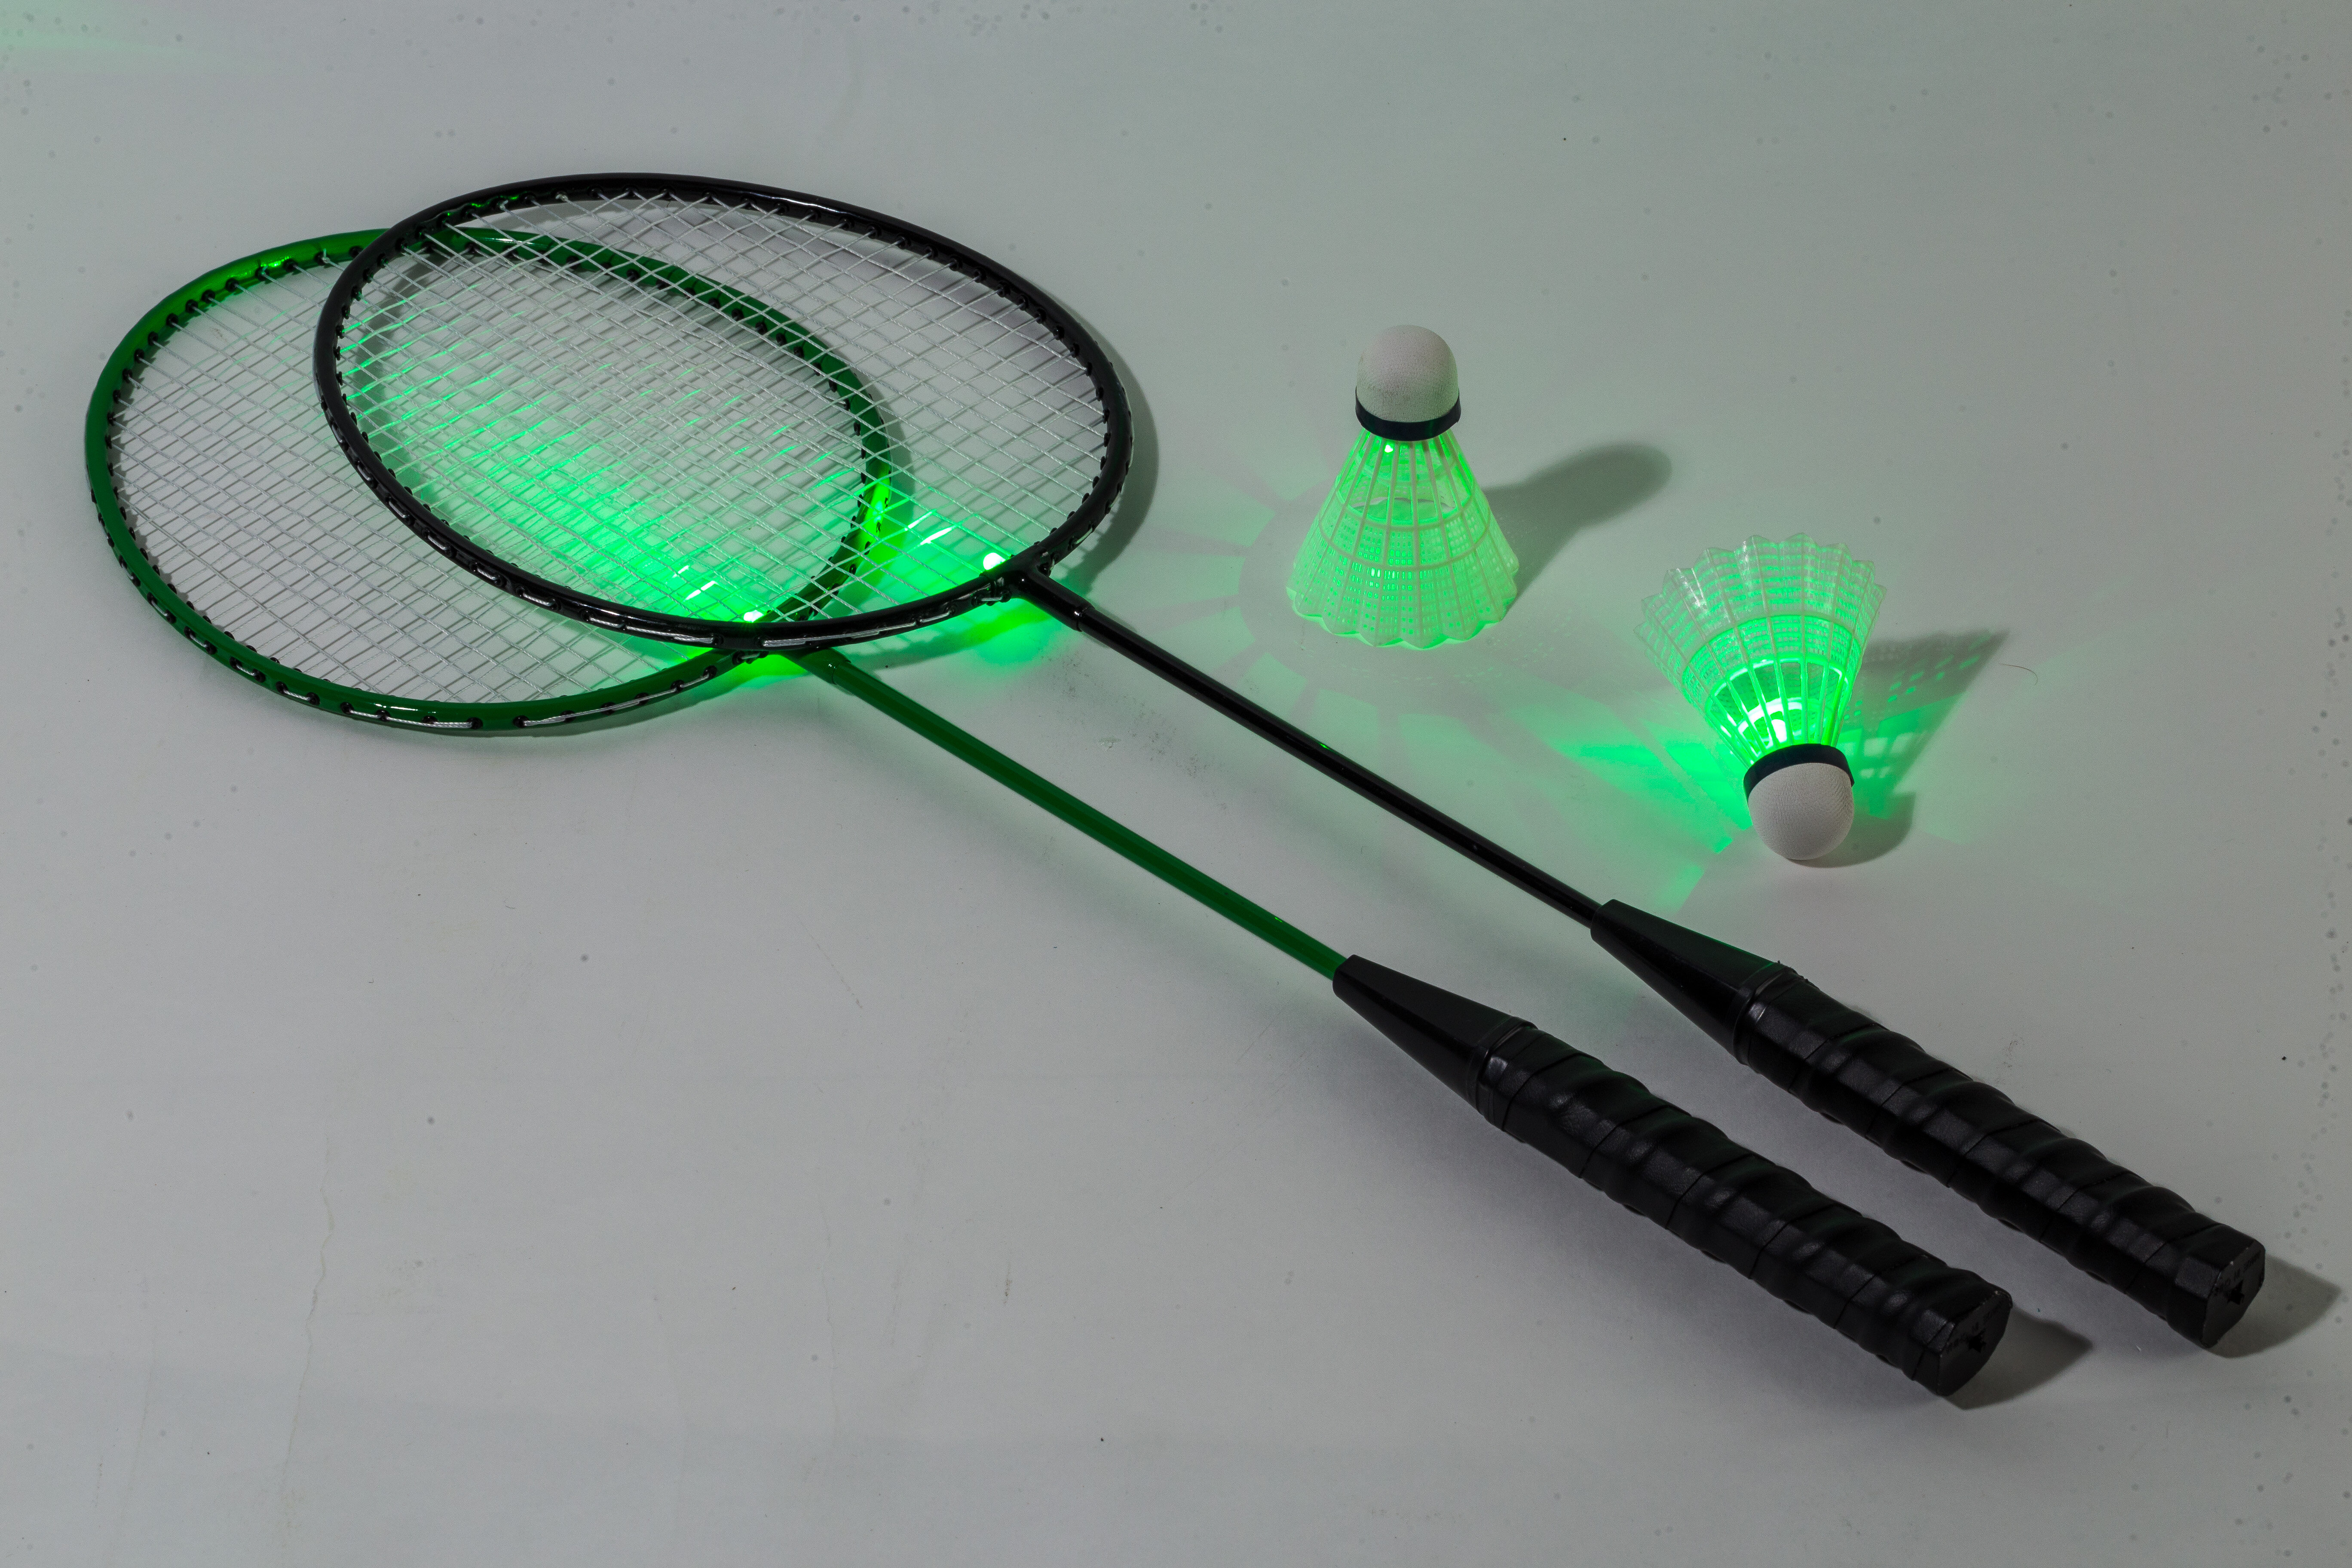 Sports 2 Player Badminton Racket Set Includes 2 Racquets and 2 Shuttlecocks